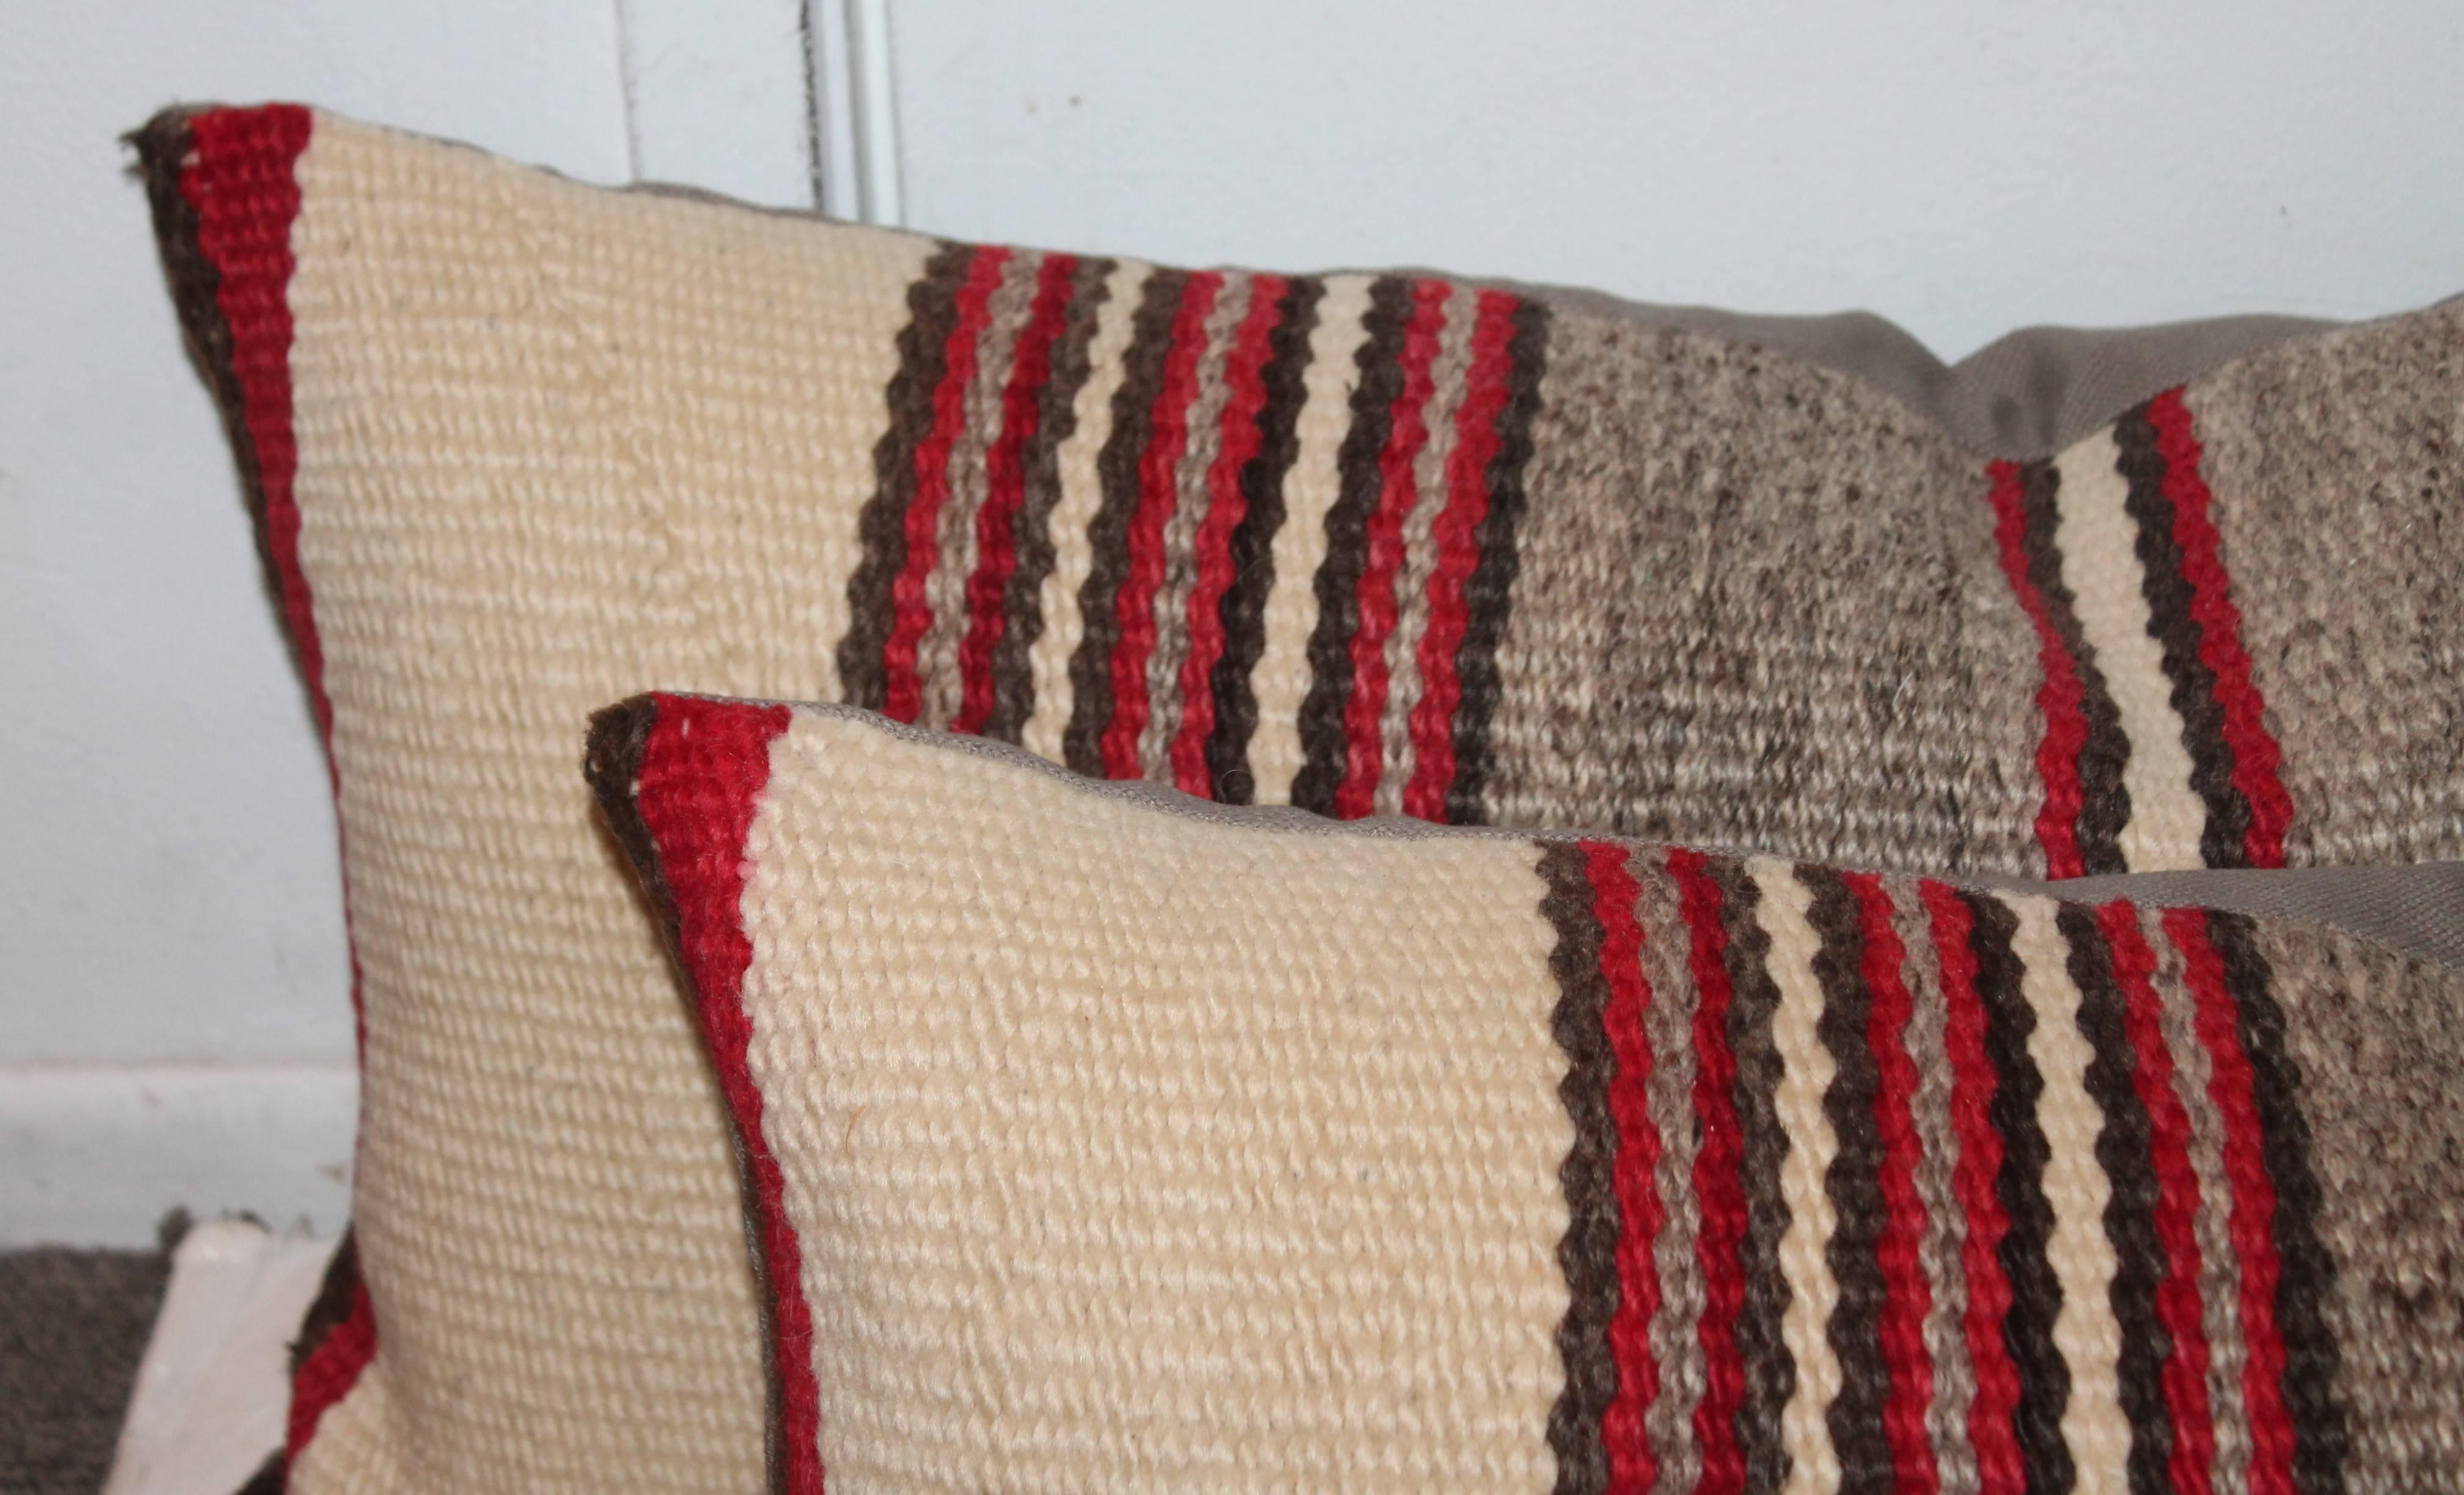 This fine and simple Navajo striped weaving bolster pillows are in great condition and sold as a pair. The backing is in a grey cotton linen.